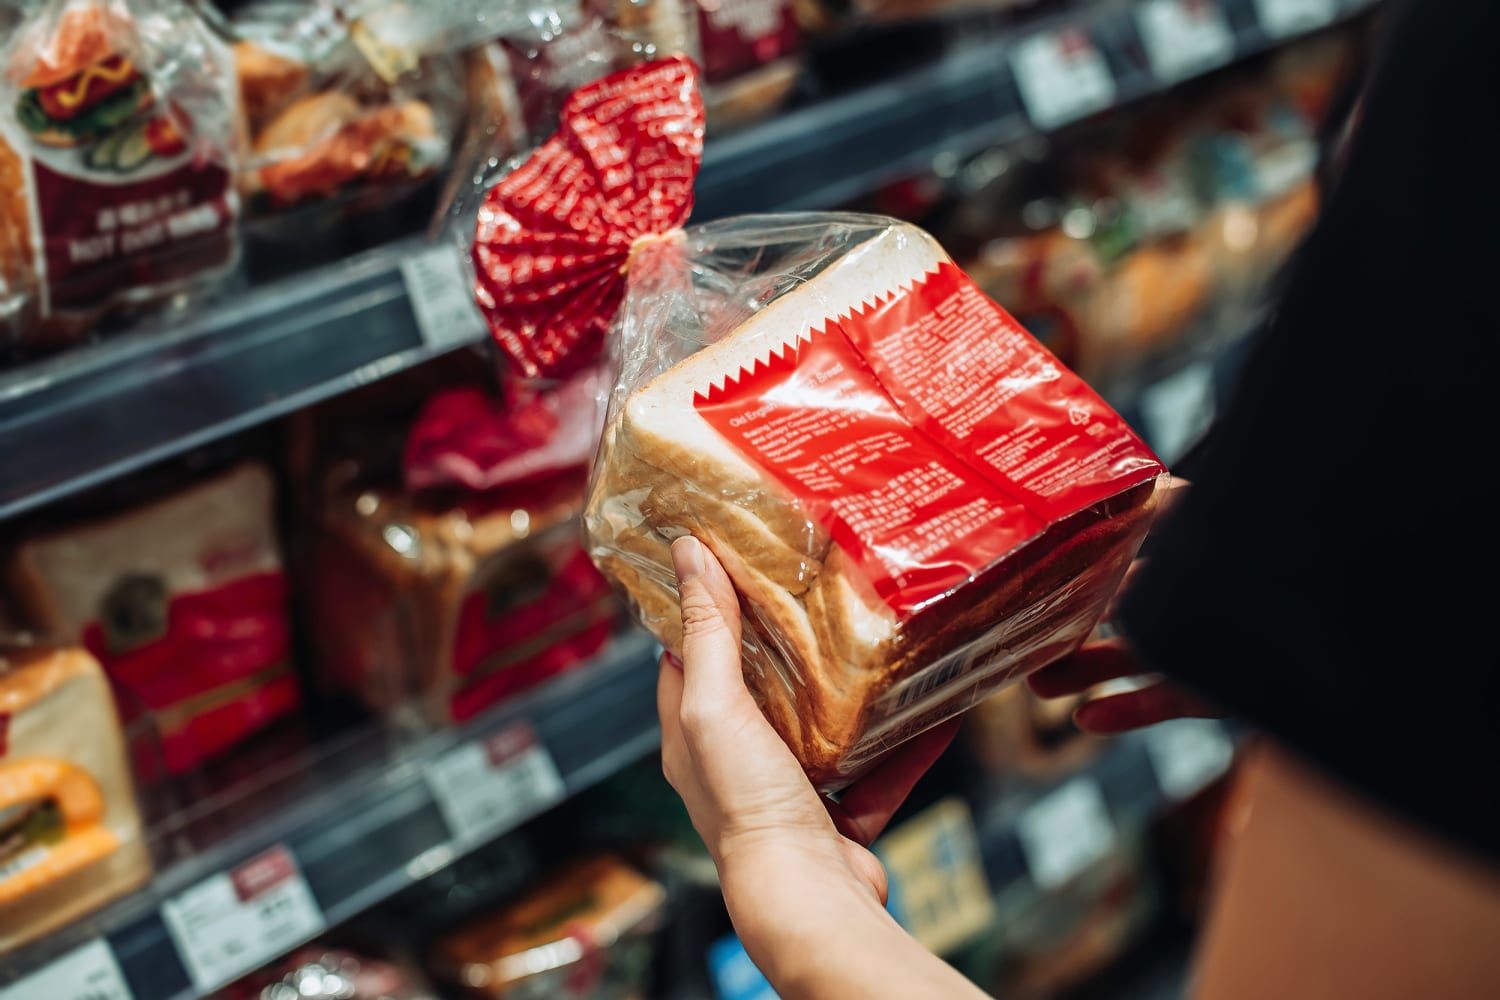 The healthiest bread you can buy according to nutritionists